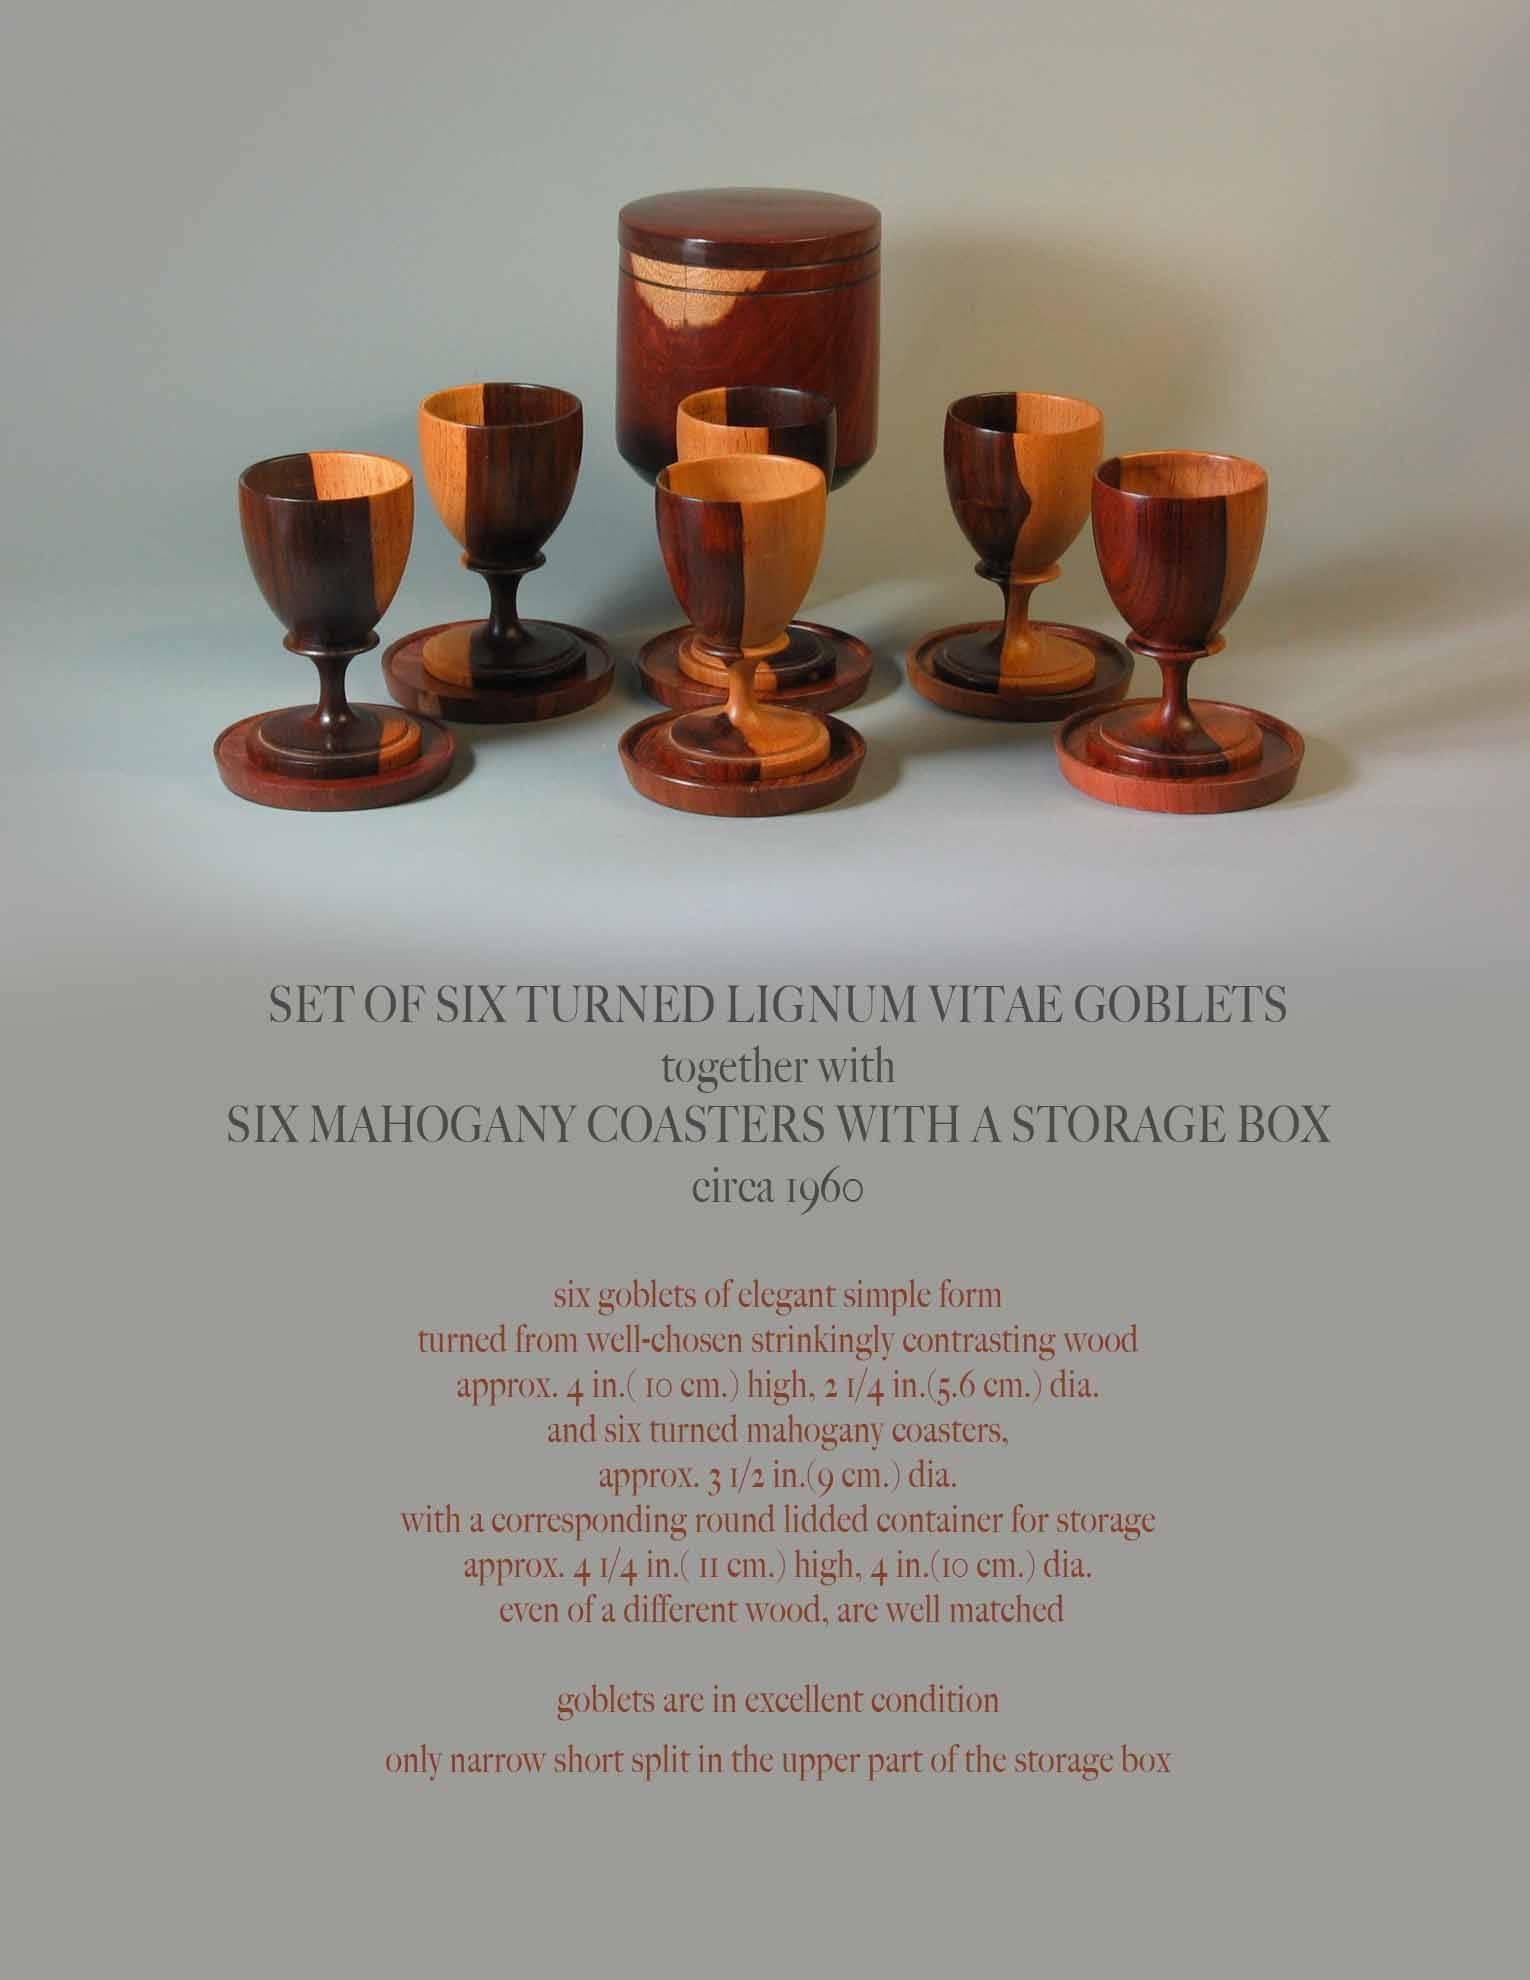 Set of six lignum vitae goblets together with six coasters with storage box, circa 1960. Six goblets of elegant simple form turned from well-chosen strickingly contrasting wood. Approx. 4